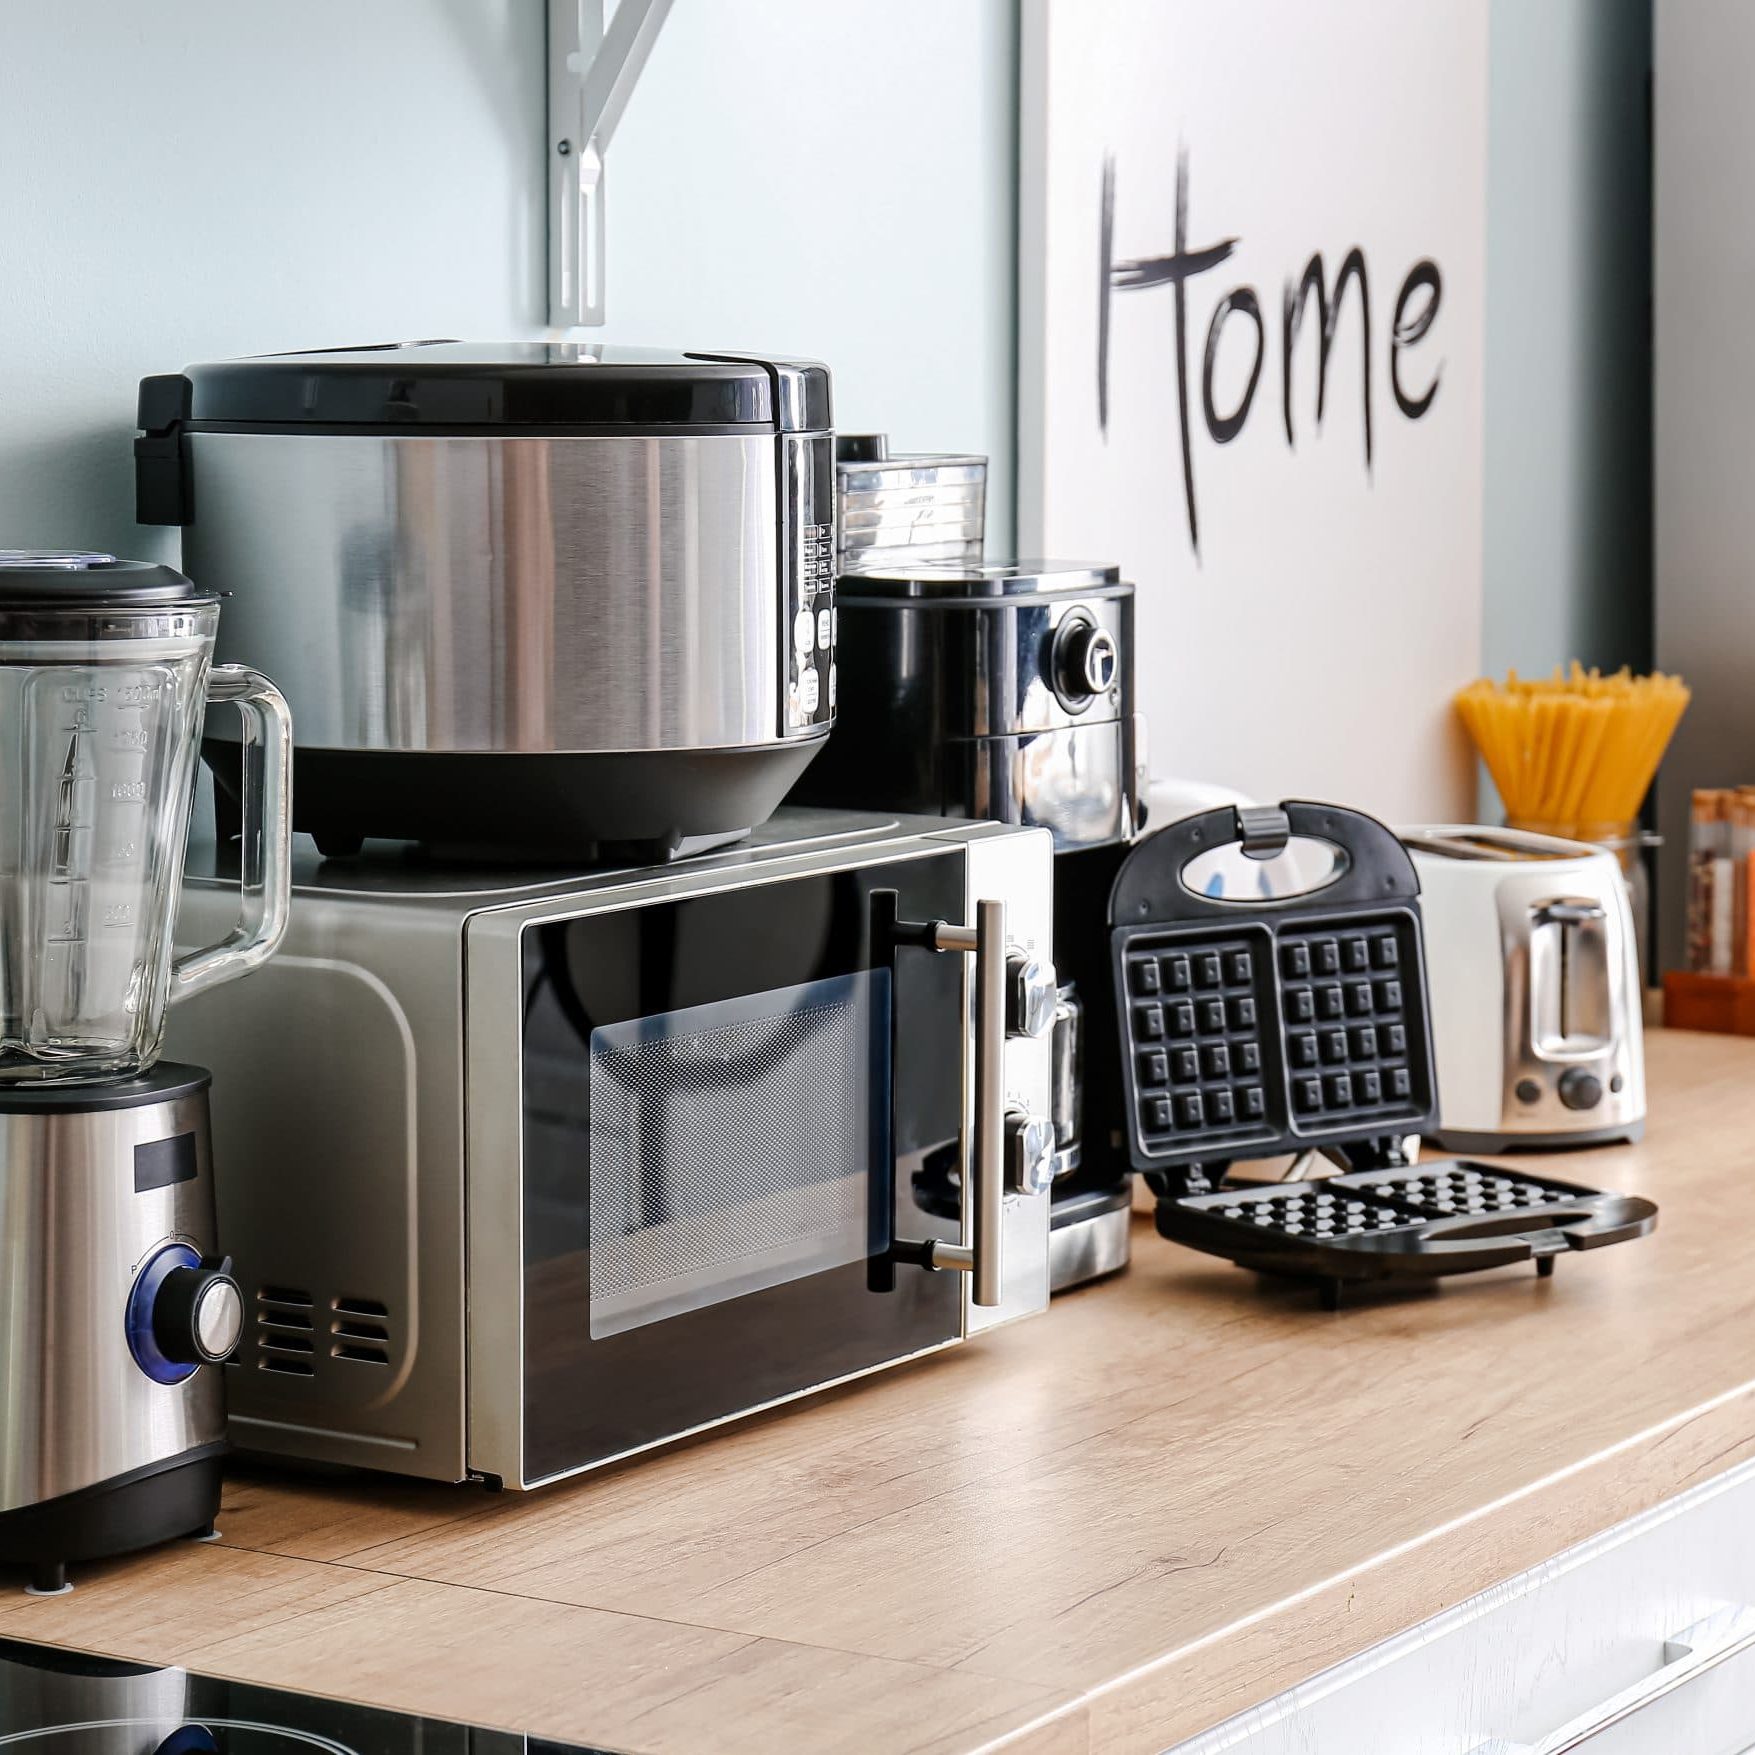 Different household appliances on table in kitchen